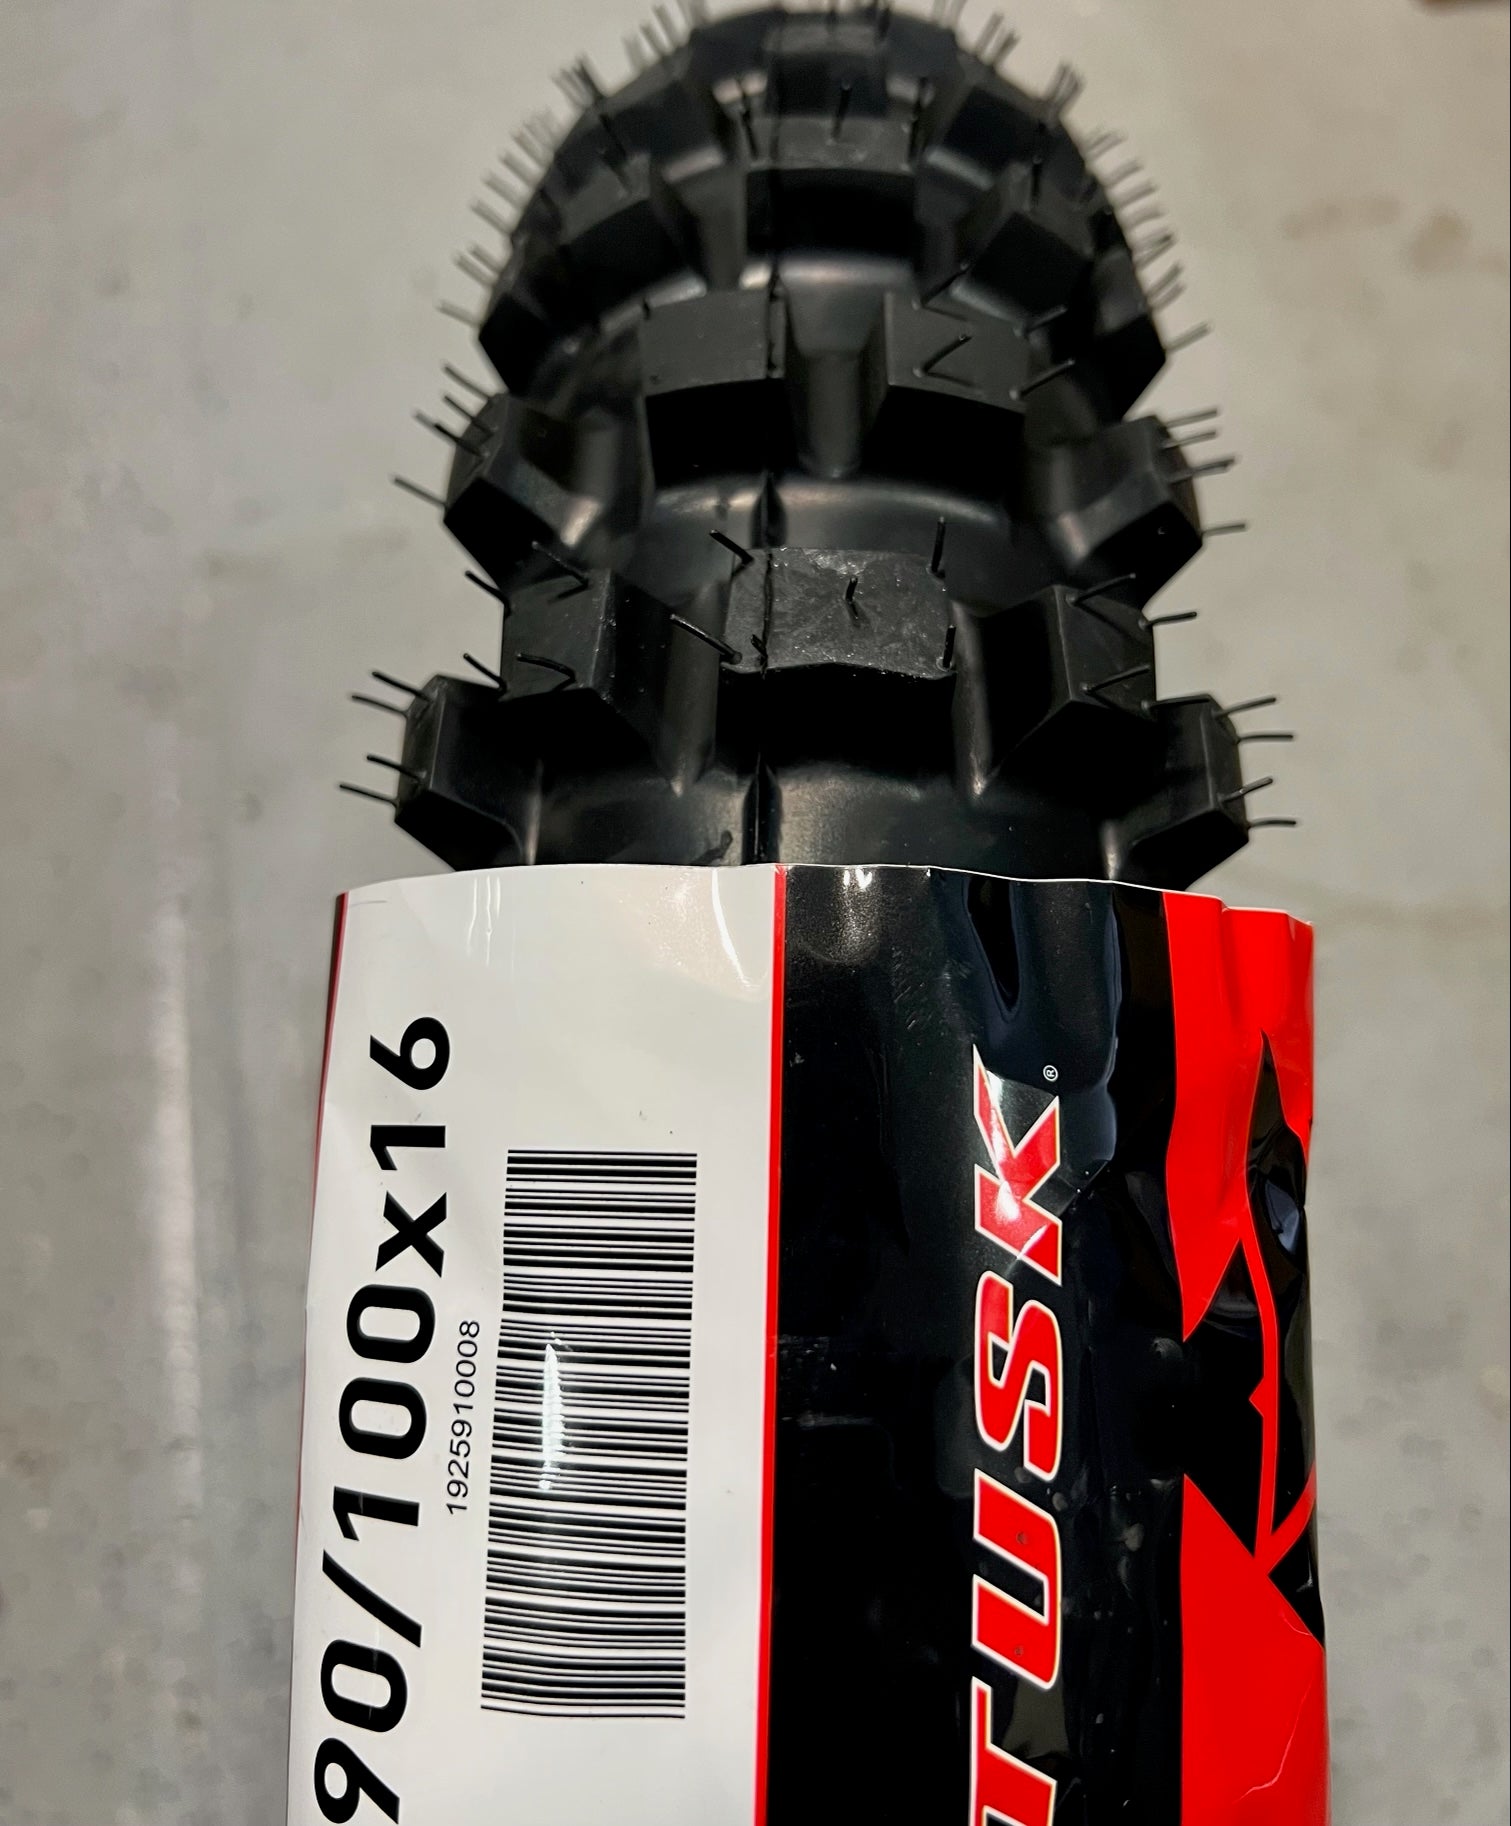 Tusk Recon Sticky Rear 16" Tire for Surron Segway